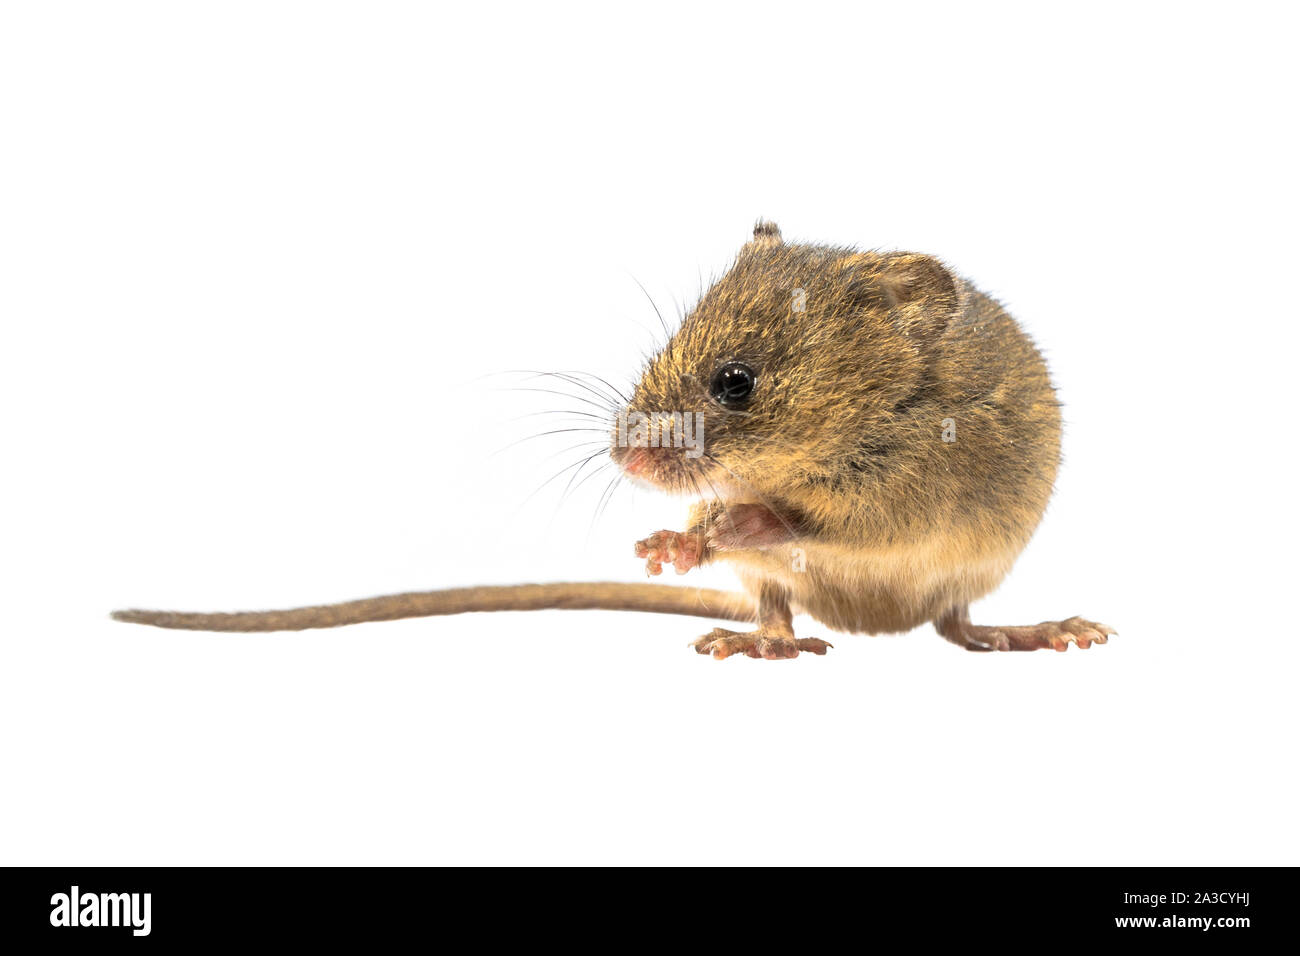 Cute Harvest Mouse (Micromys minutus) sitting on hind legs on white background, studio shot. This is the smallest rodent species native to Europe and Stock Photo